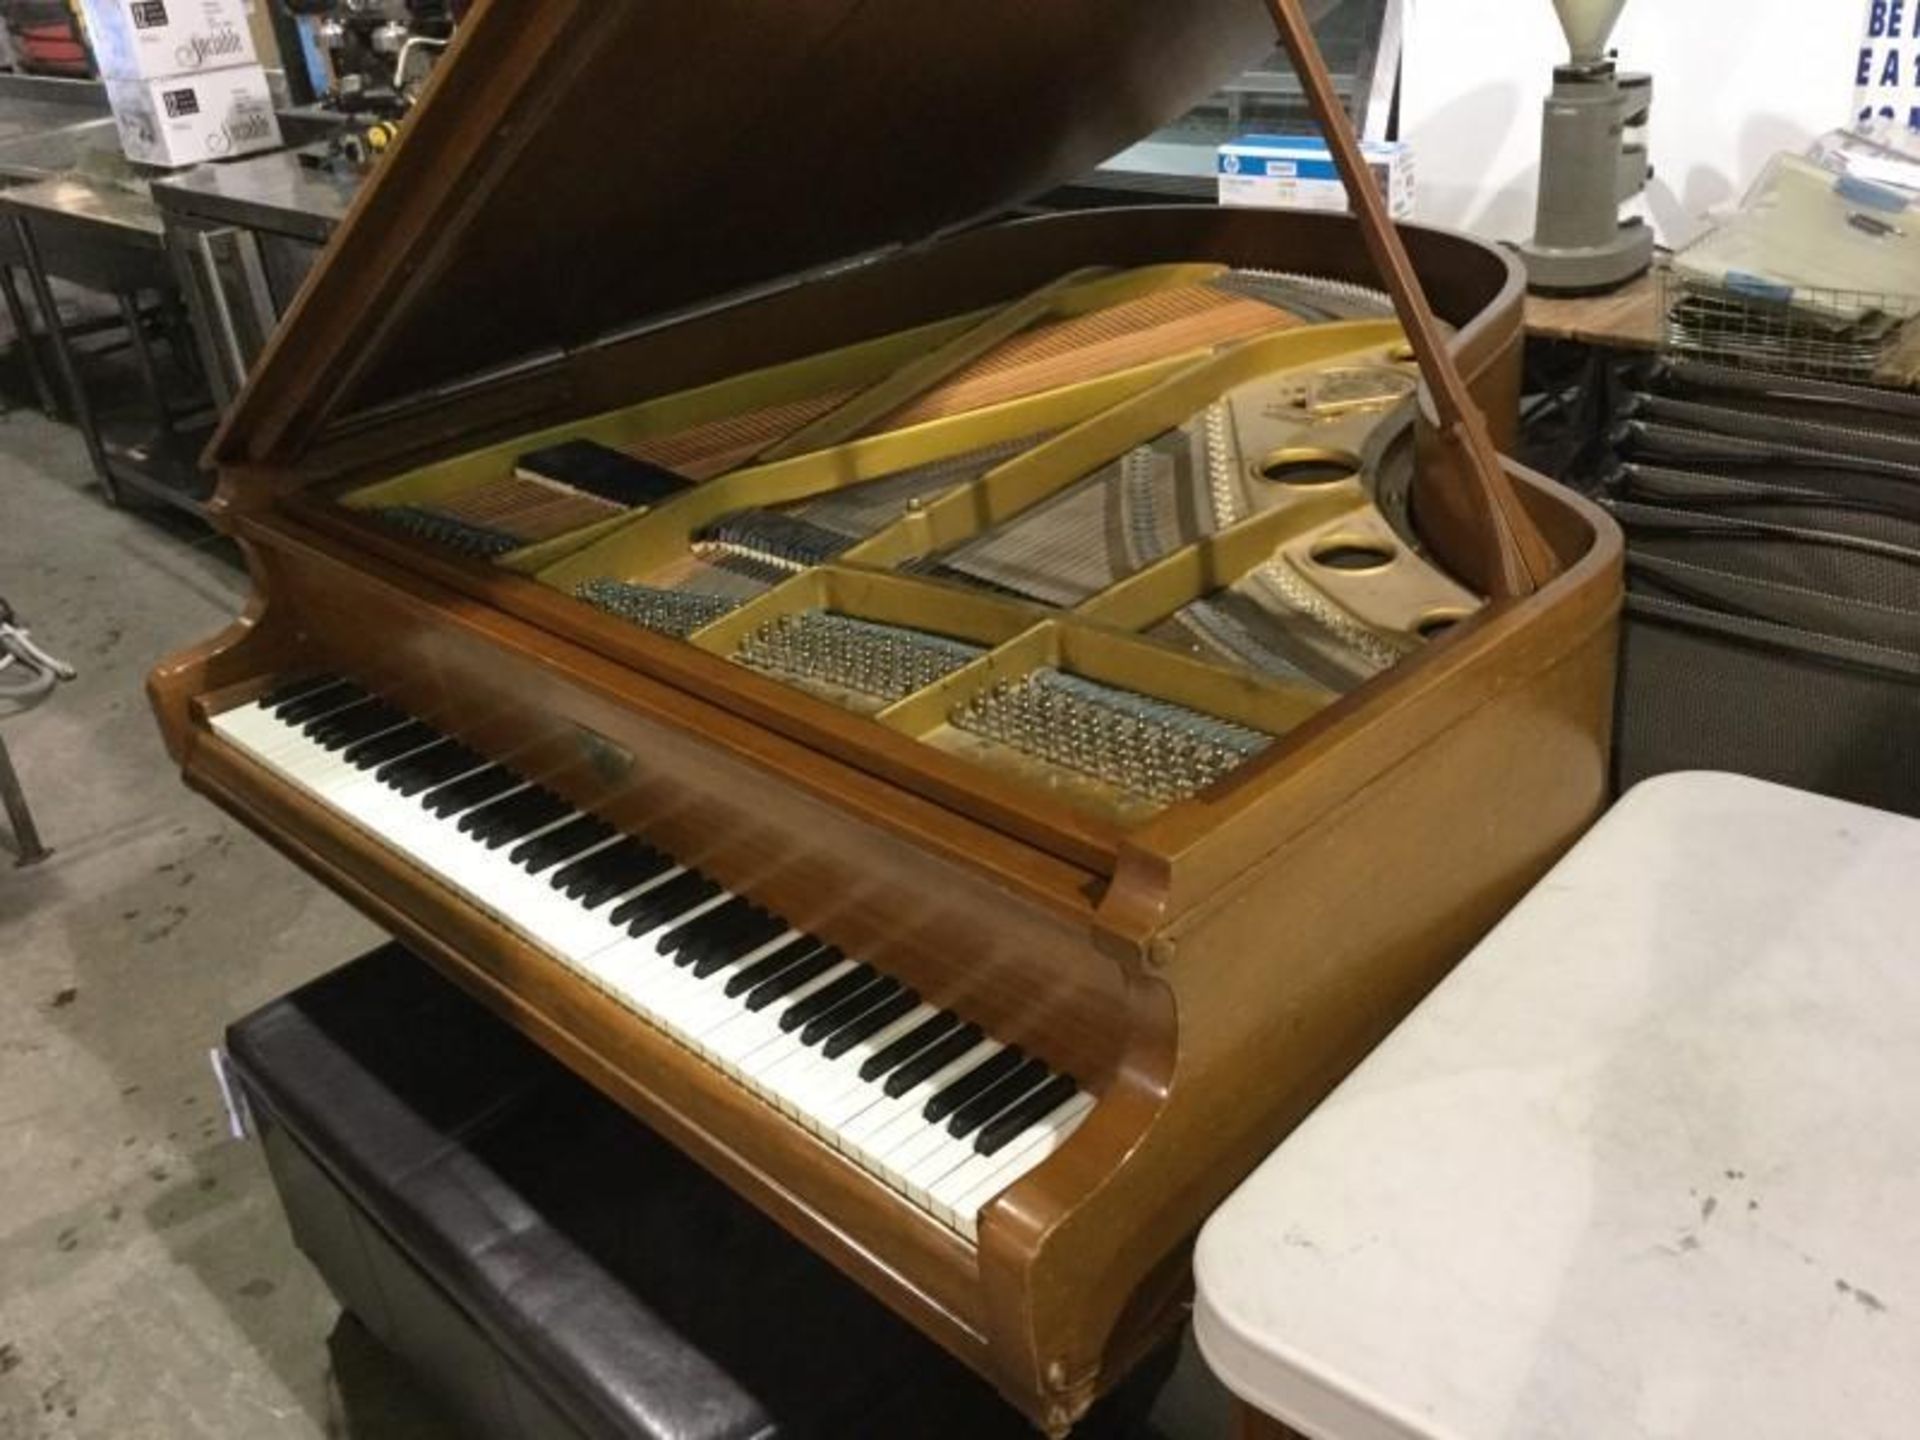 March 21, 2018. Auction - From a Piano to a Sink we have it all. Restaurant Equipment, Returns and M